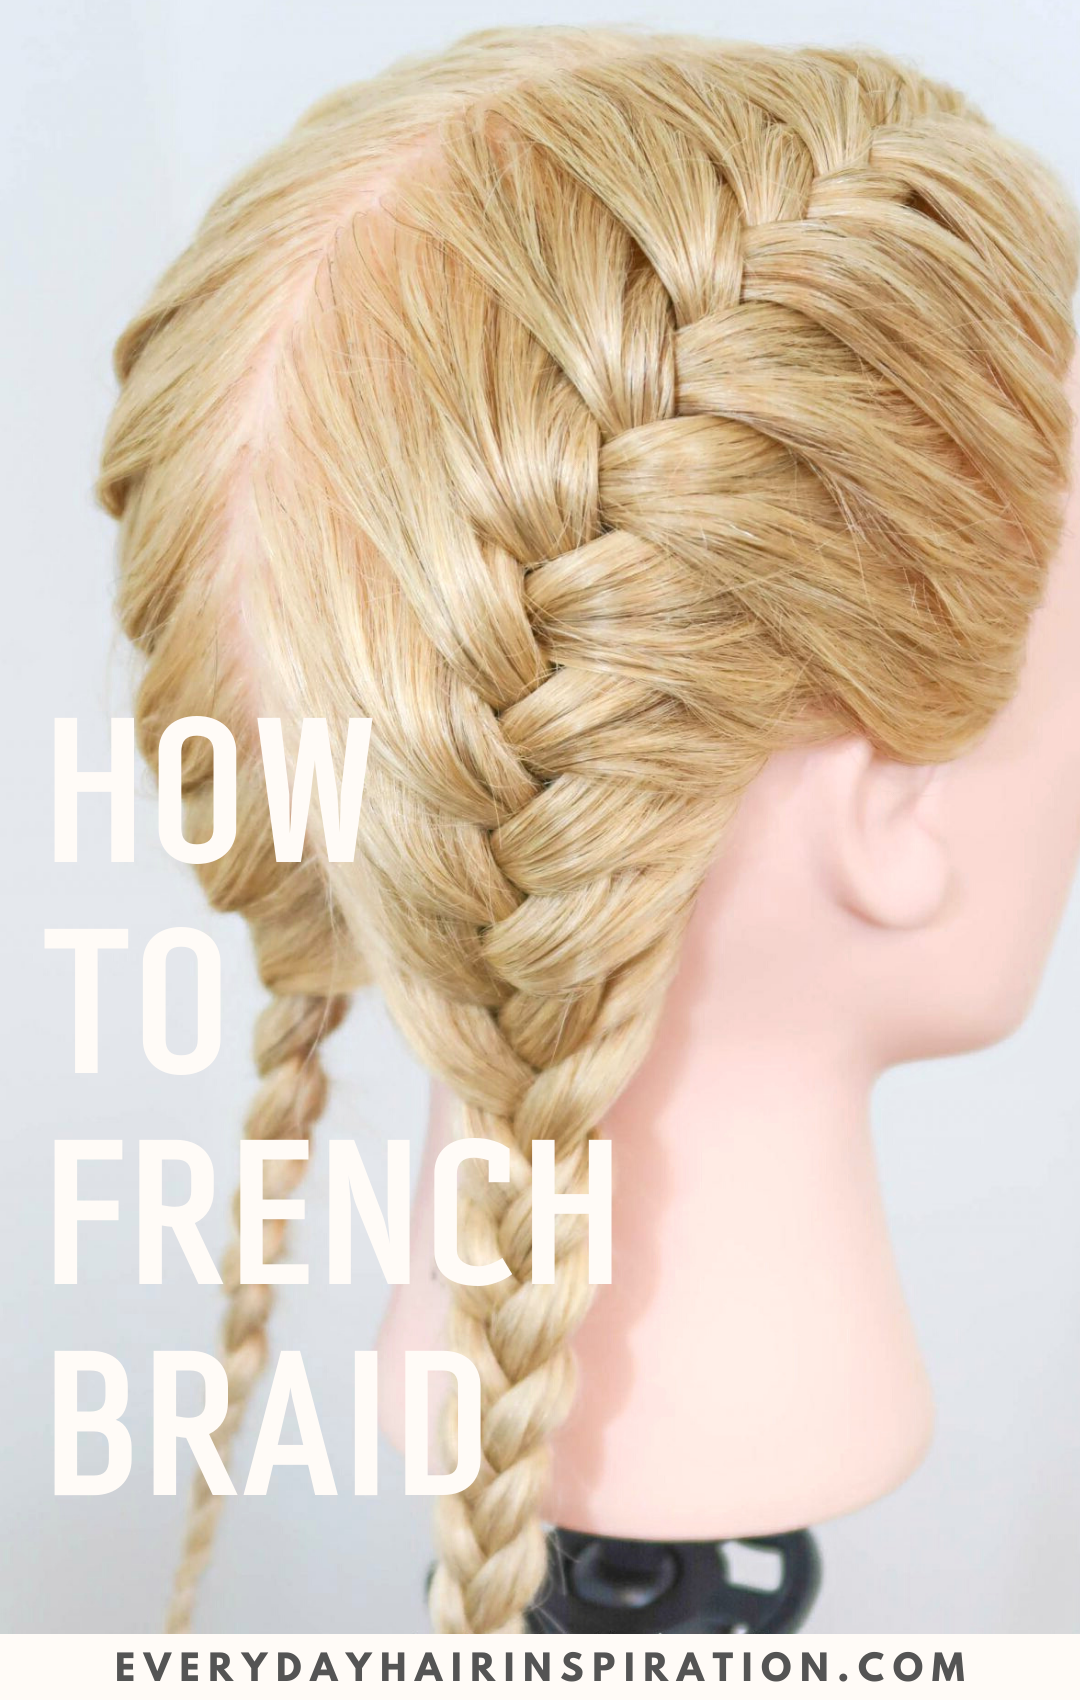 Two french braids!  Two braid hairstyles, French braid hairstyles